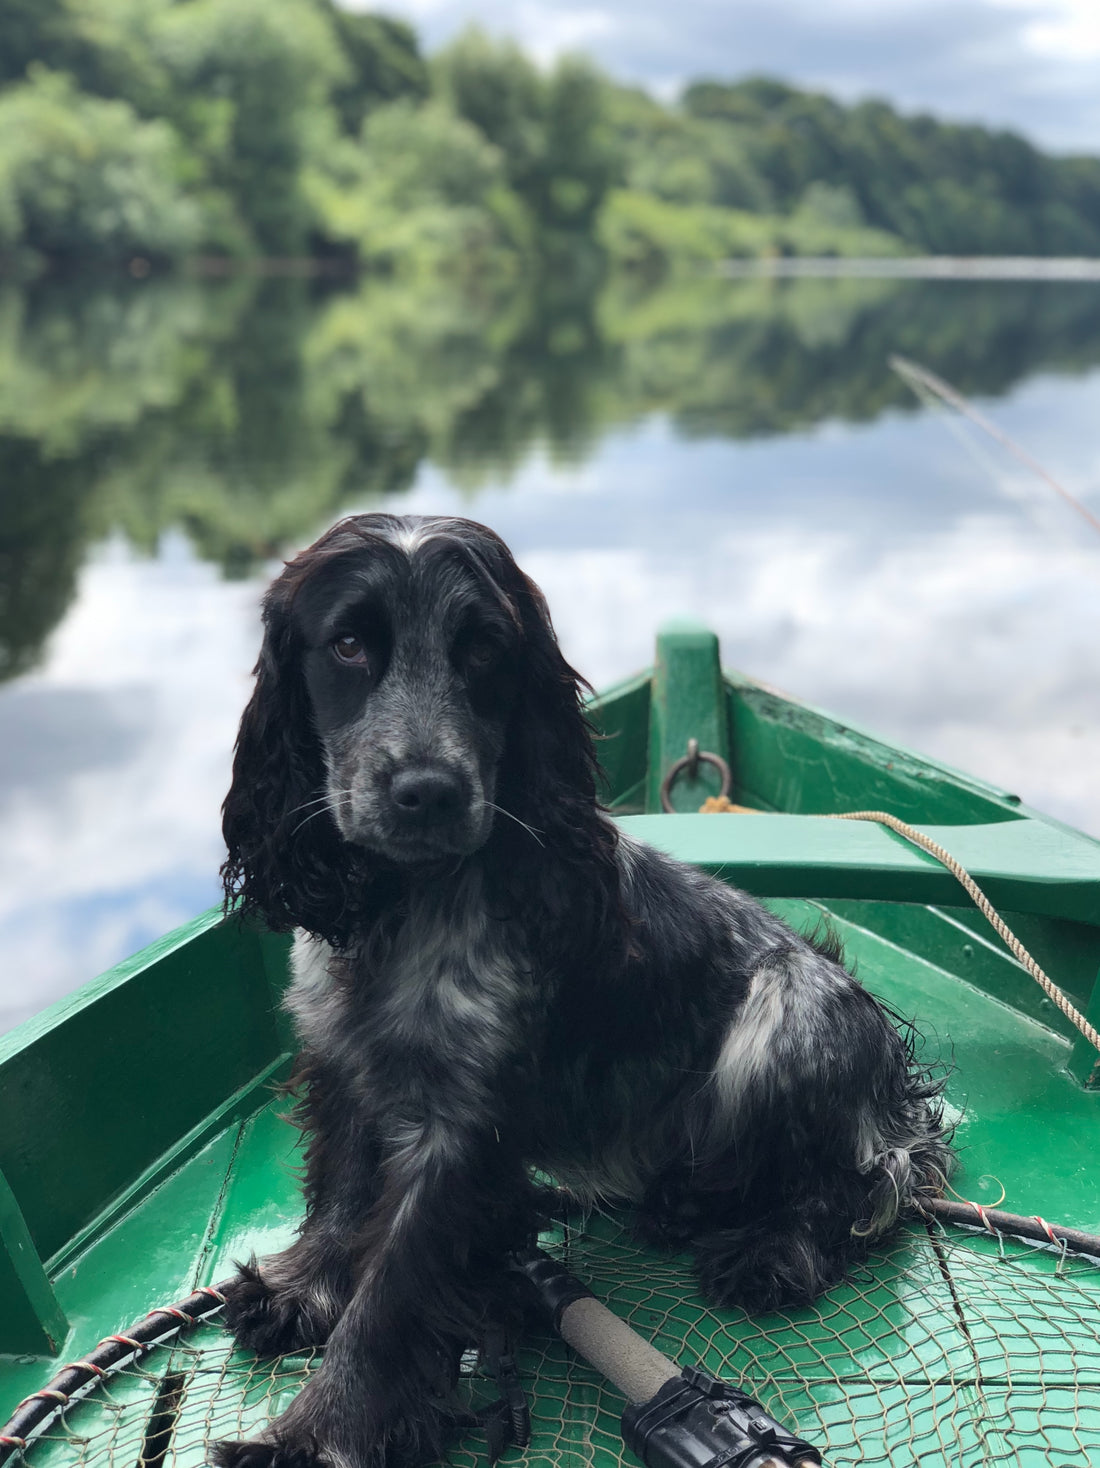 A black and white cocker spaniel puppy sitting in a green kayak on a river